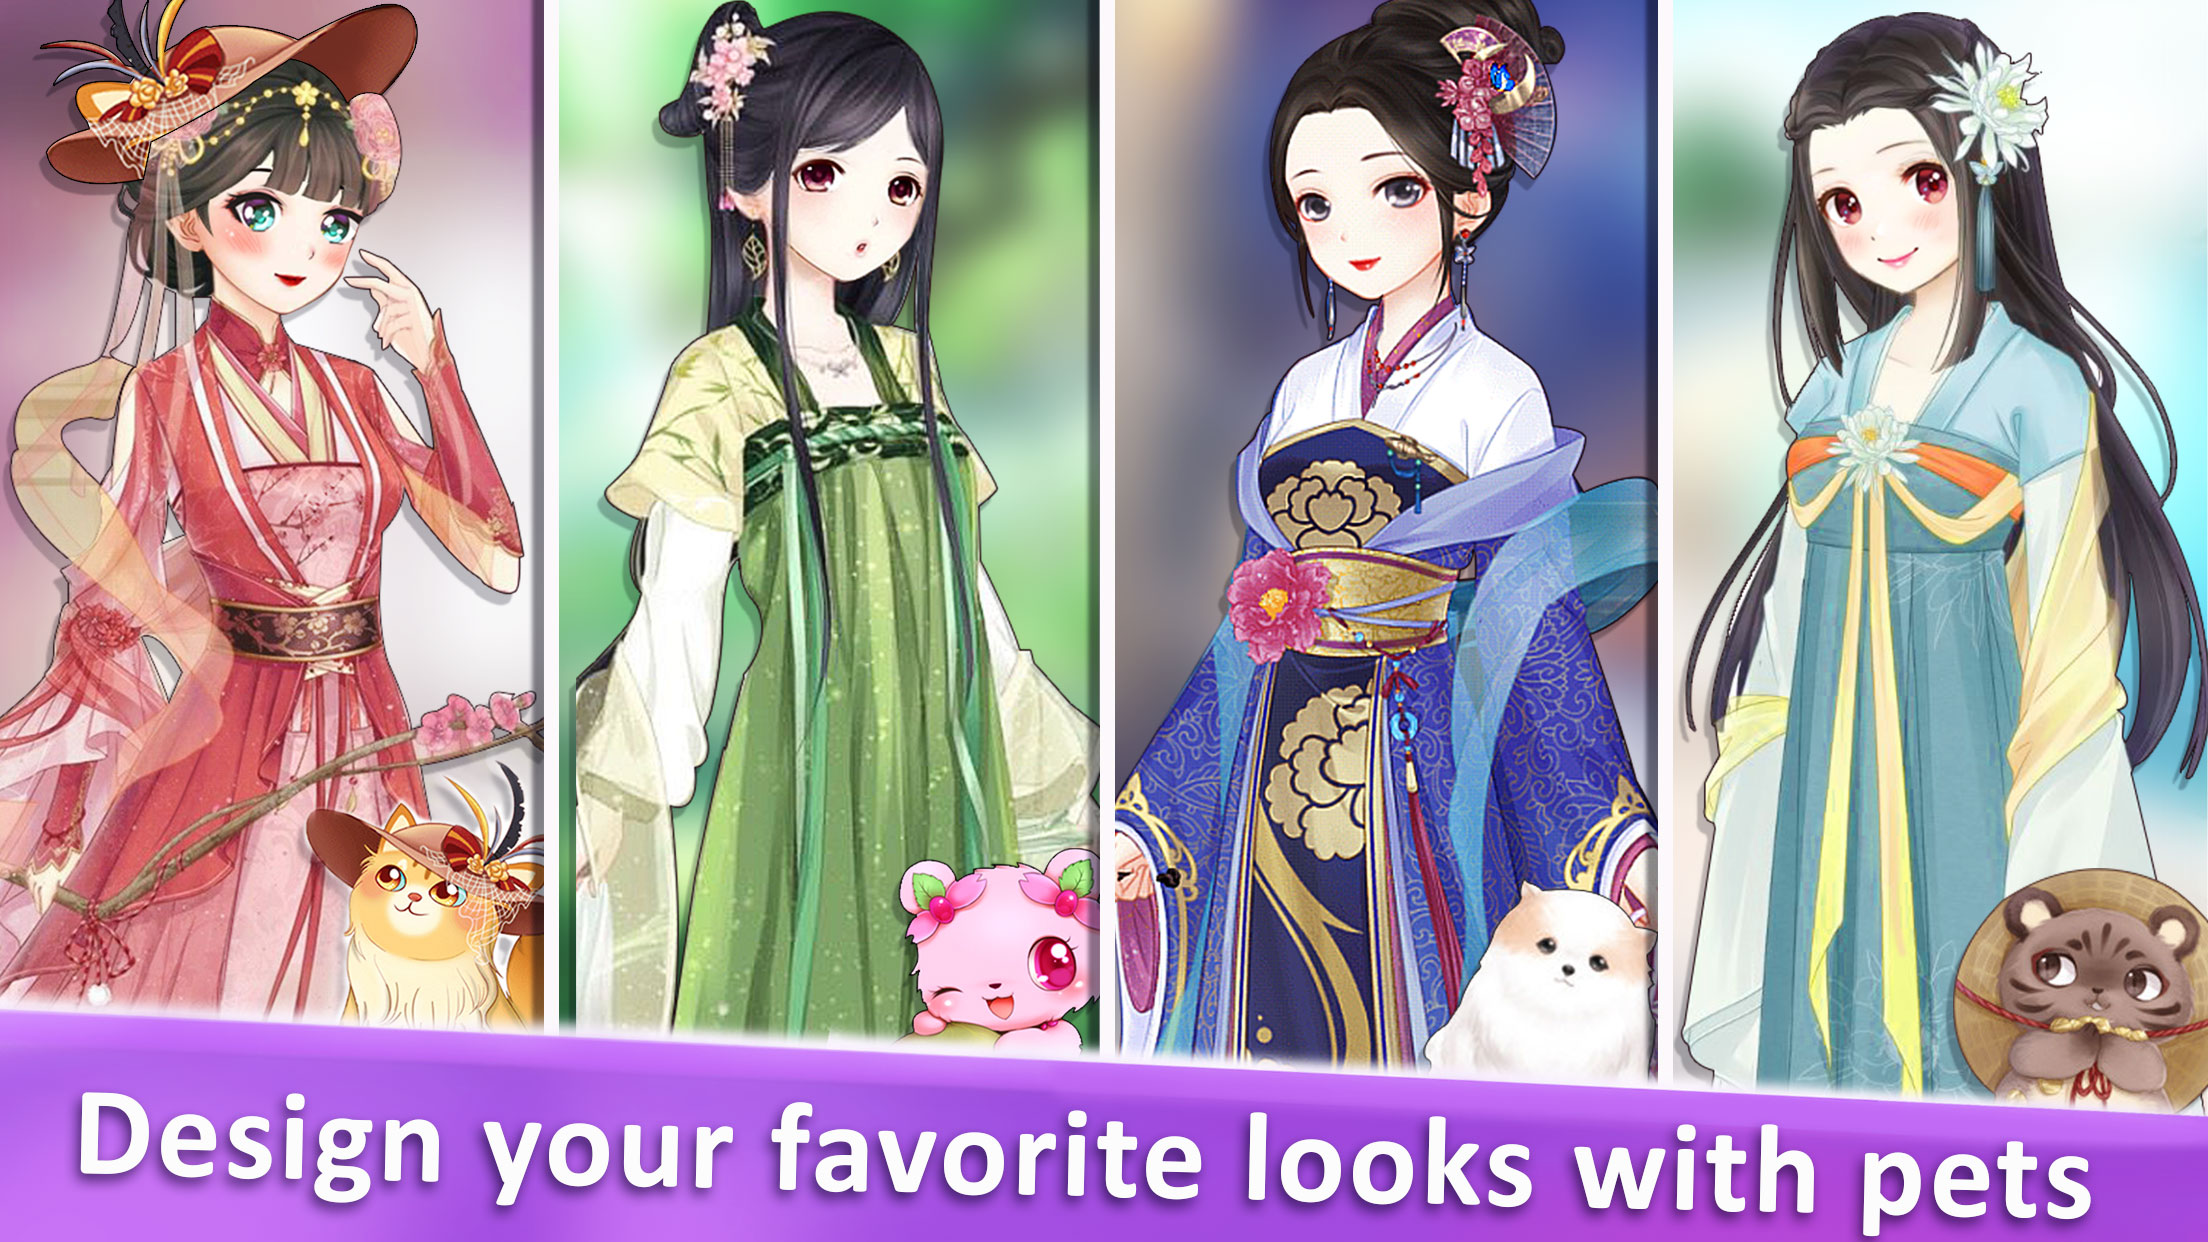 🔥 Download Chibi Outfitter Anime Dress Up Game v3.4.2 APK . Adorable anime  style dress up game 